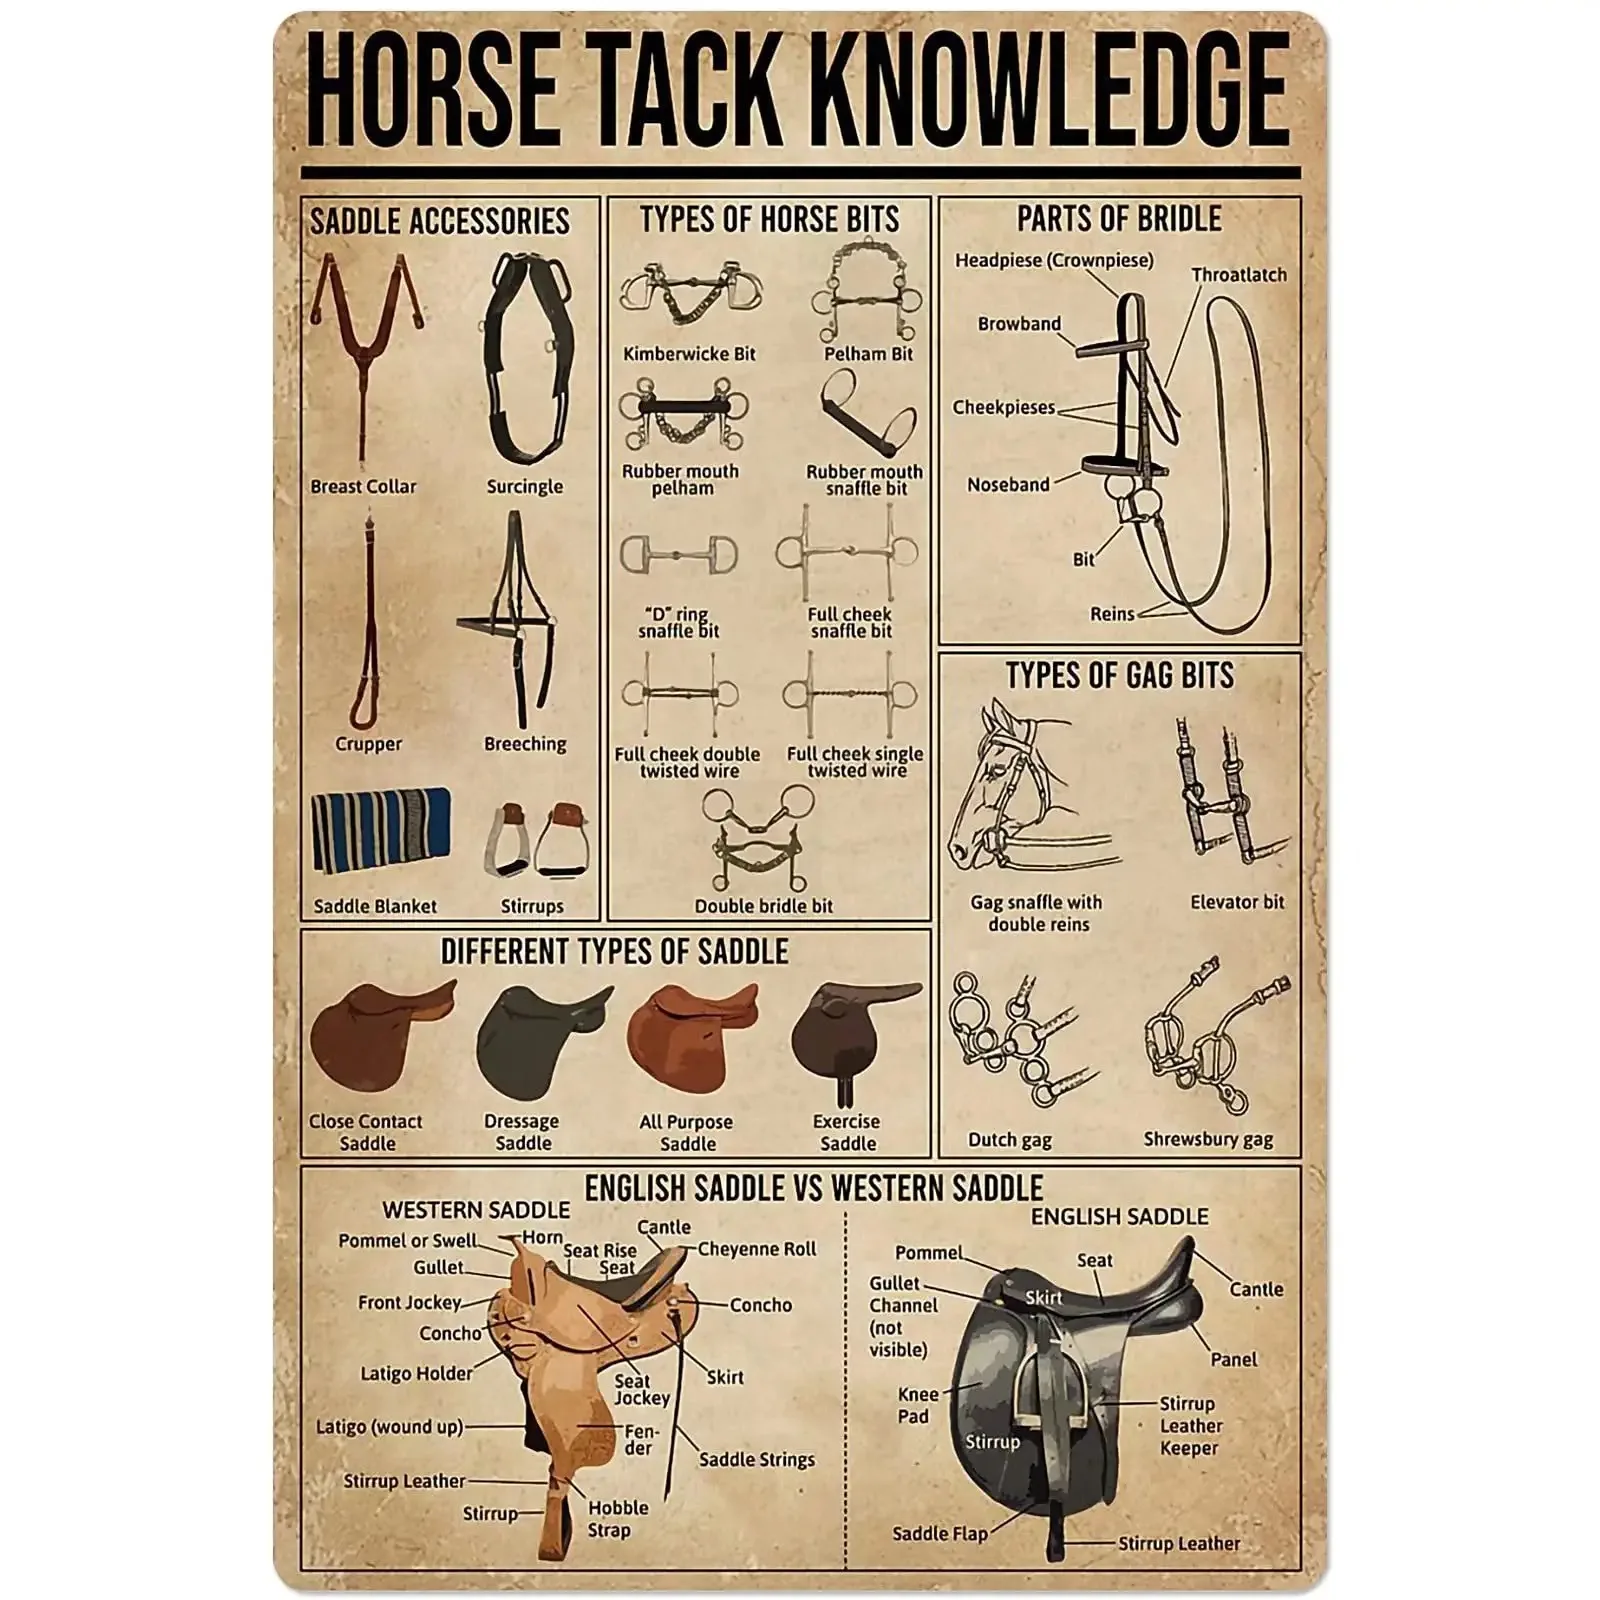 

Horse Tack Knowledge Metal Signs Wall Decor Cowboy Guide Posters Farm Club Decor Home Decor Plaque 8x12 Inches